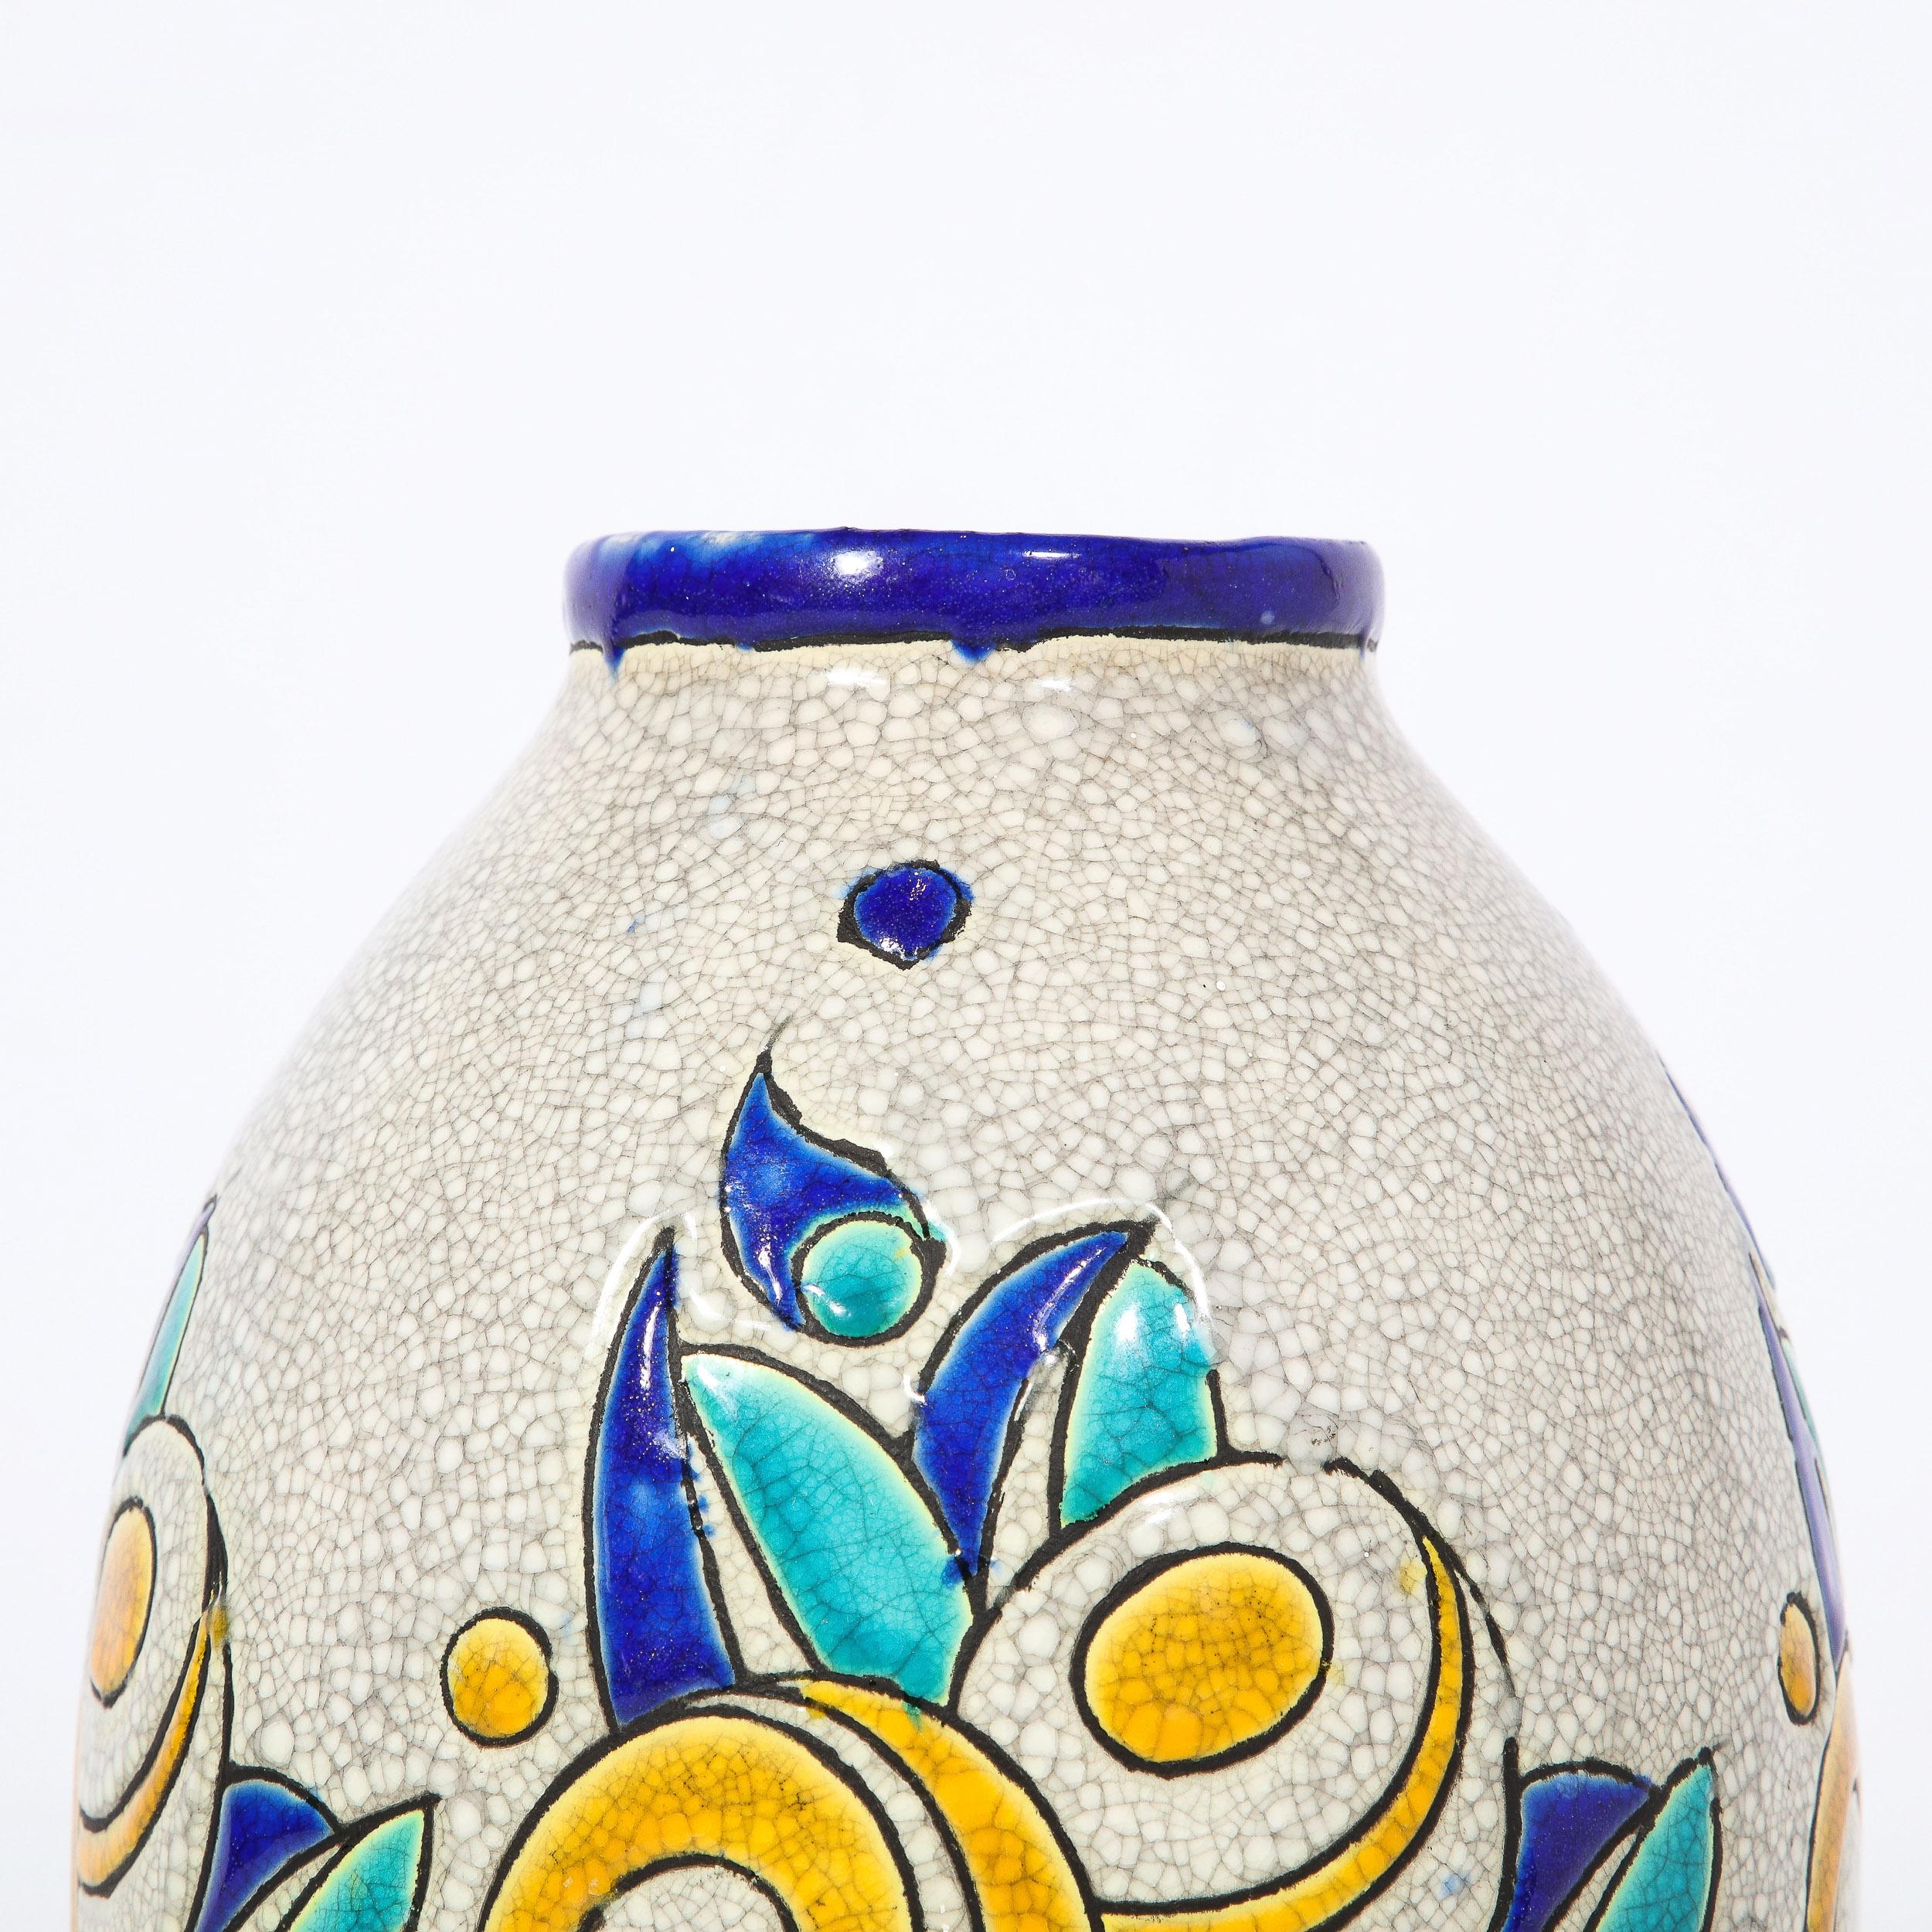 Art Deco Cubic Floral Ceramic Vase by Charles Catteau for Boch Freres Keramis For Sale 3